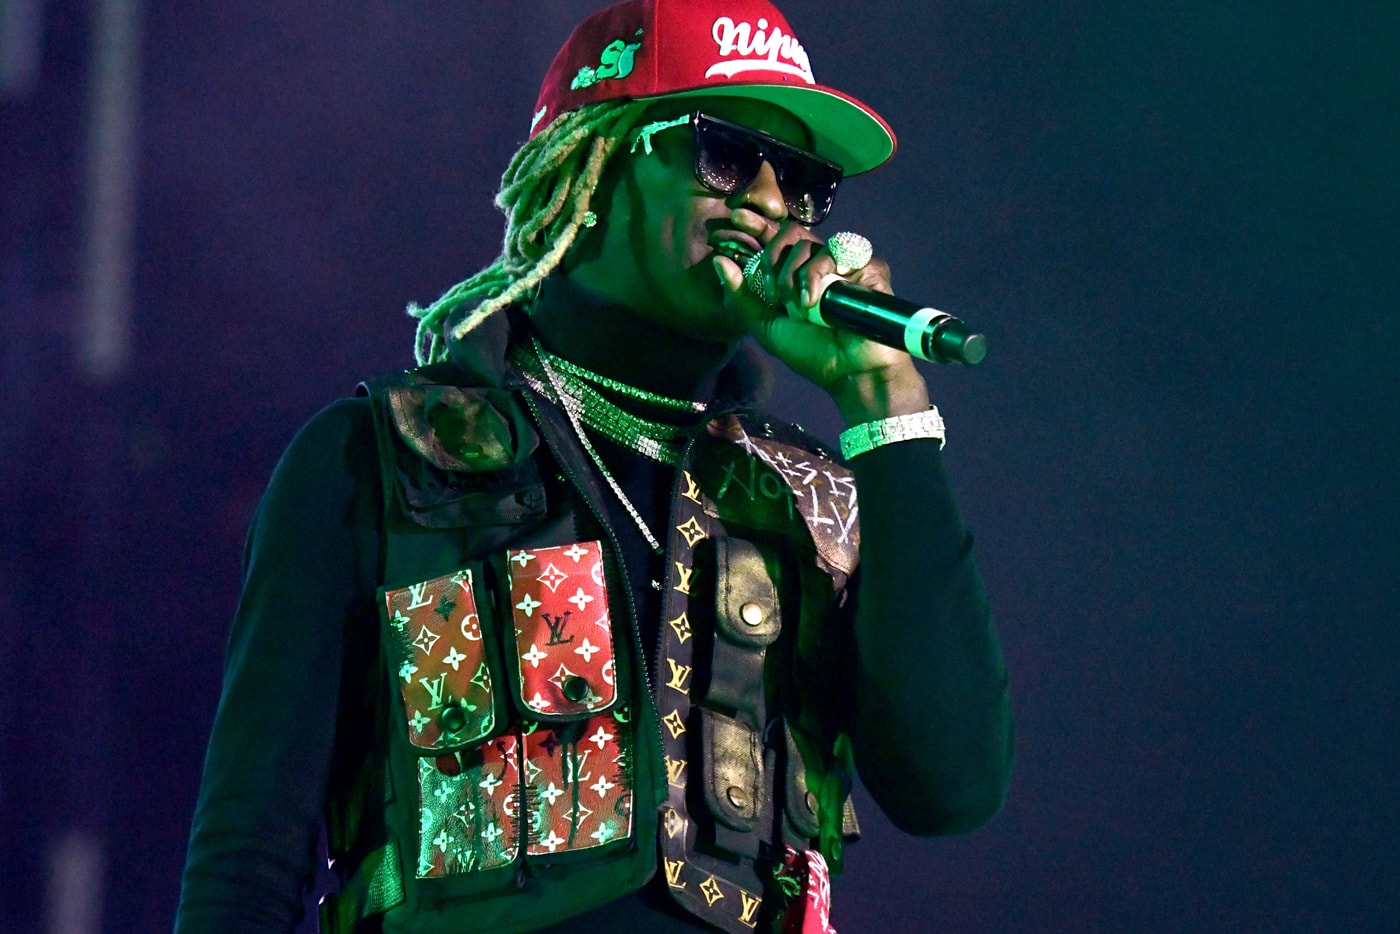 Young Thug to Drop Punk Album In February 2020 'so much fun' hiphollywood 'punk' project 